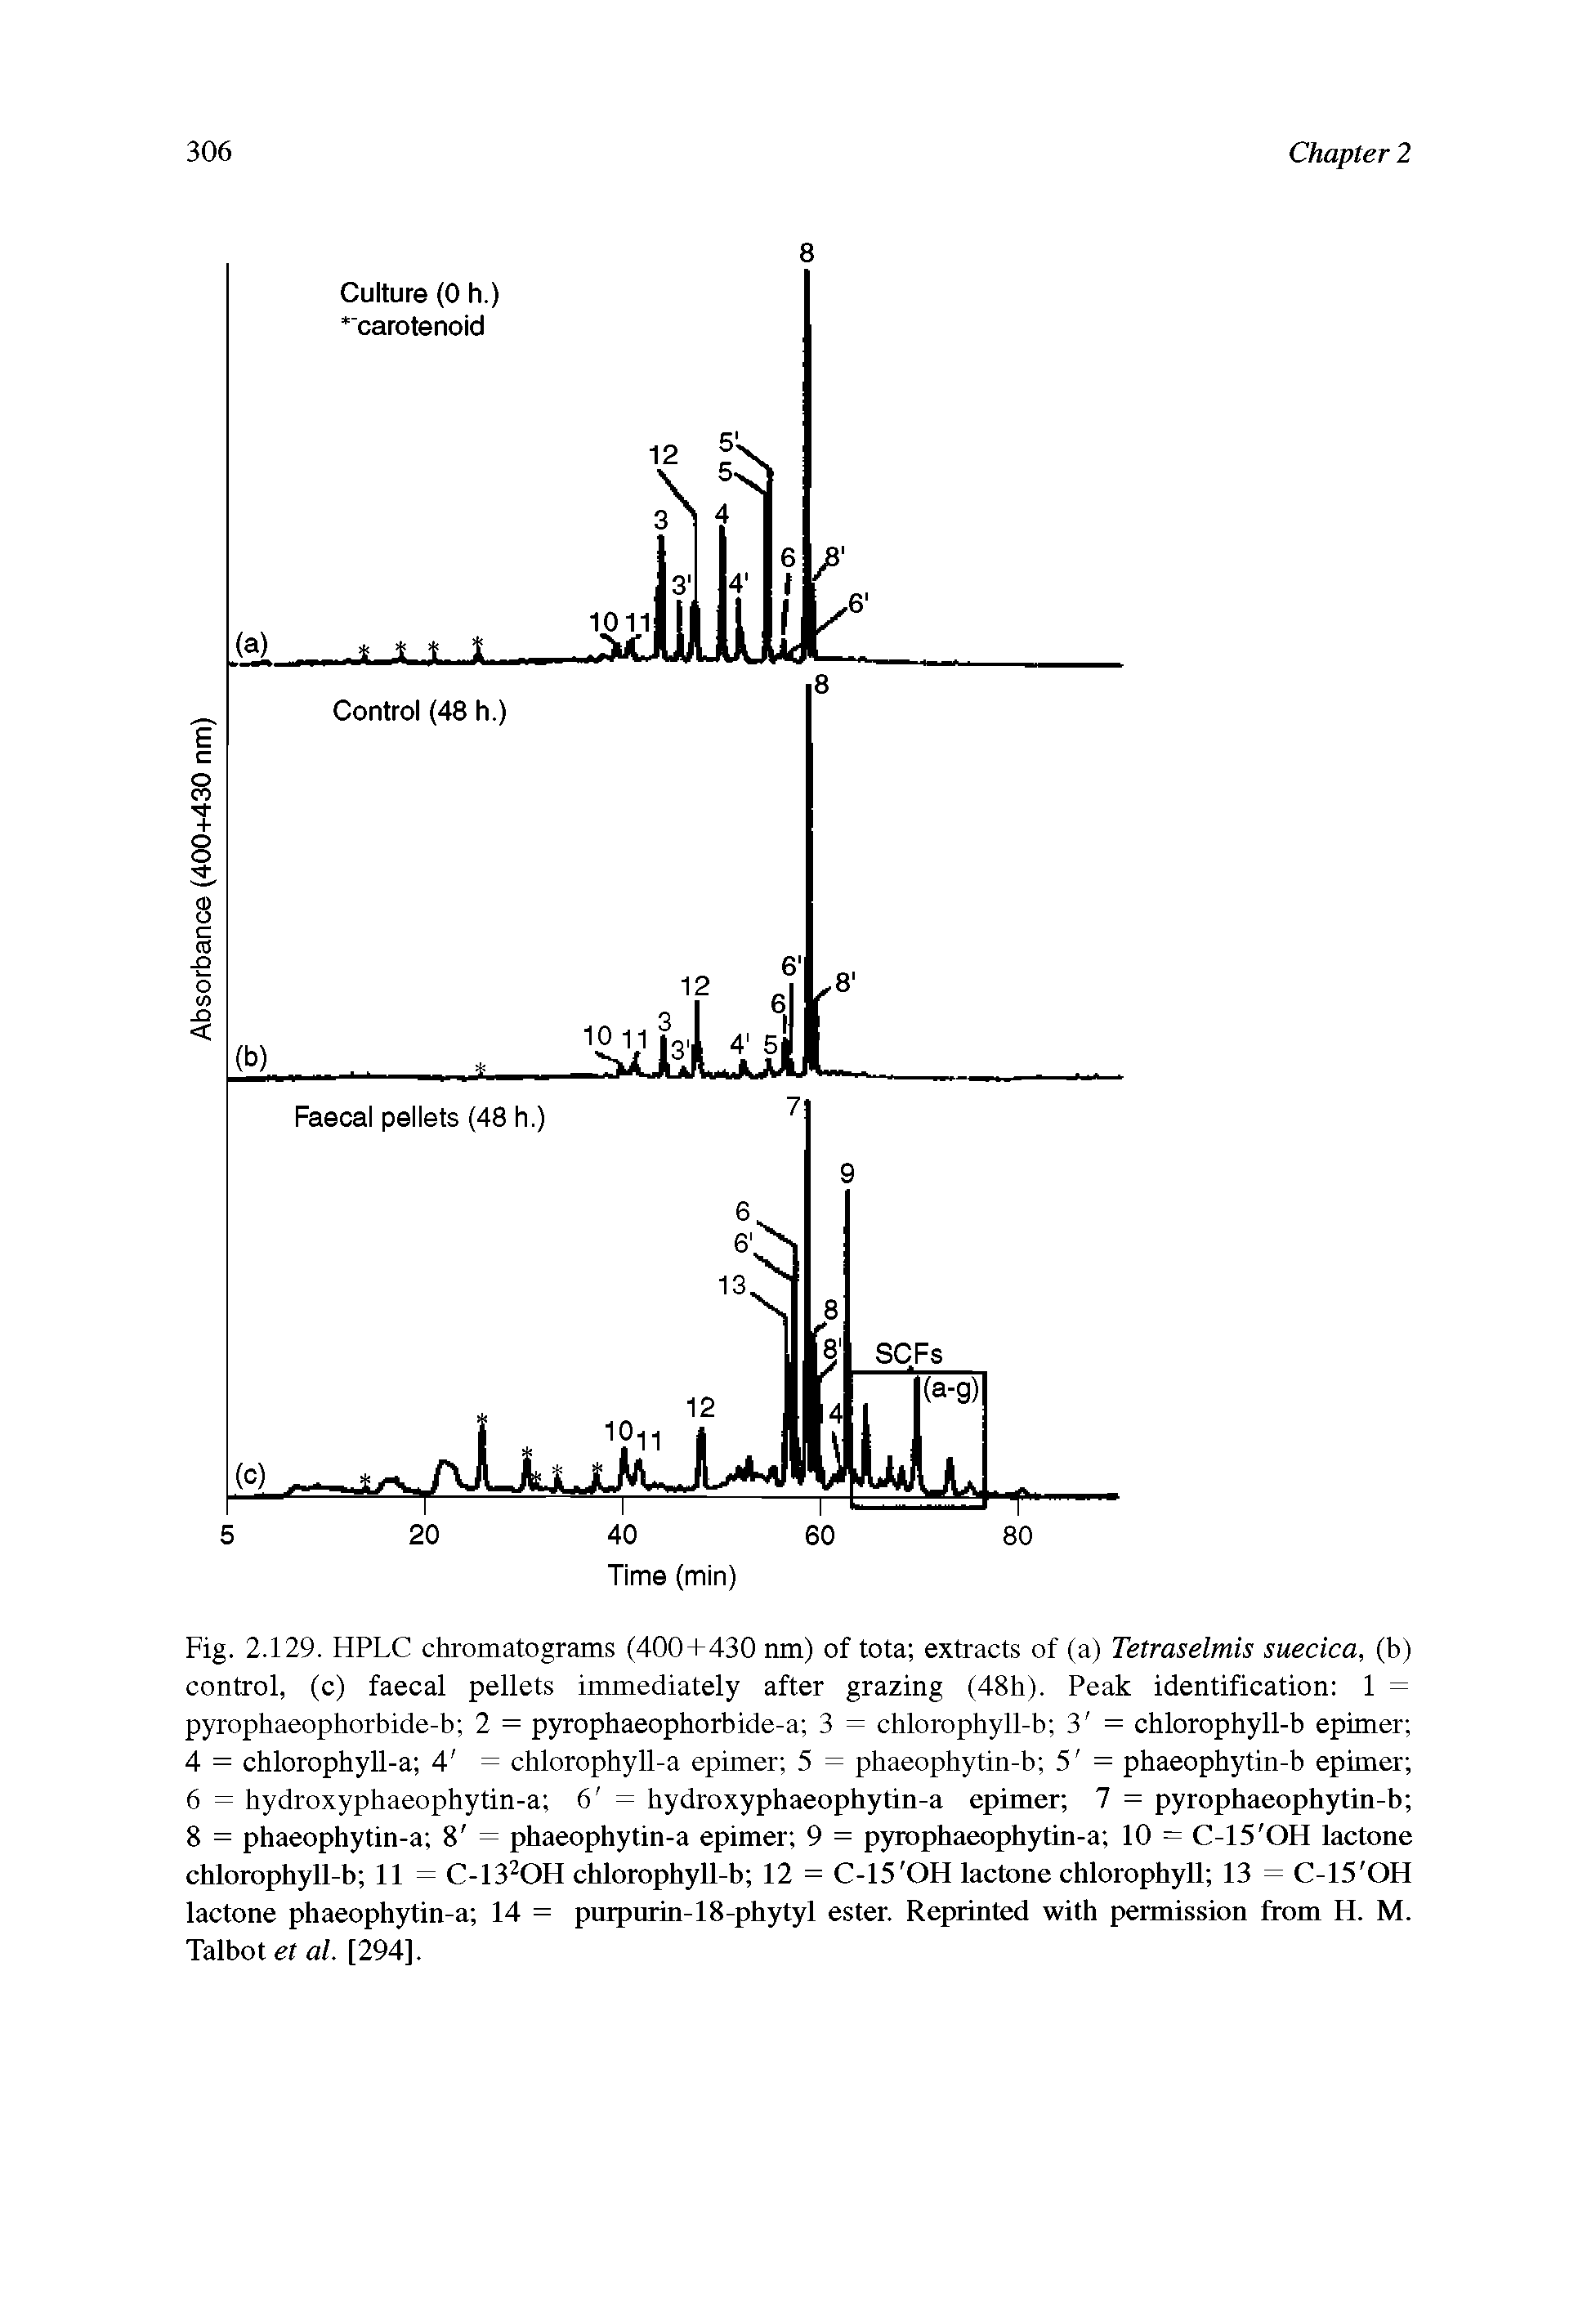 Fig. 2.129. HPLC chromatograms (400+430 nm) of tota extracts of (a) Tetraselmis suecica, (b) control, (c) faecal pellets immediately after grazing (48h). Peak identification 1 = pyrophaeophorbide-b 2 = pyrophaeophorbide-a 3 = chlorophyll-b 3 = chlorophyll-b epimer 4 = chlorophyll-a 4 = chlorophyll-a epimer 5 = phaeophytin-b 5 = phaeophytin-b epimer 6 = hydroxyphaeophytin-a 6 = hydroxyphaeophytin-a epimer 7 = pyrophaeophytin-b 8 = phaeophytin-a 8 = phaeophytin-a epimer 9 = pyrophaeophytin-a 10 = C-15 OH lactone chlorophyll-b 11 = C-132OH chlorophyll-b 12 = C-15 OH lactone chlorophyll 13 = C-15 OH lactone phaeophytin-a 14 = purpurin-18-phytyl ester. Reprinted with permission from H. M. Talbot et al. [294].